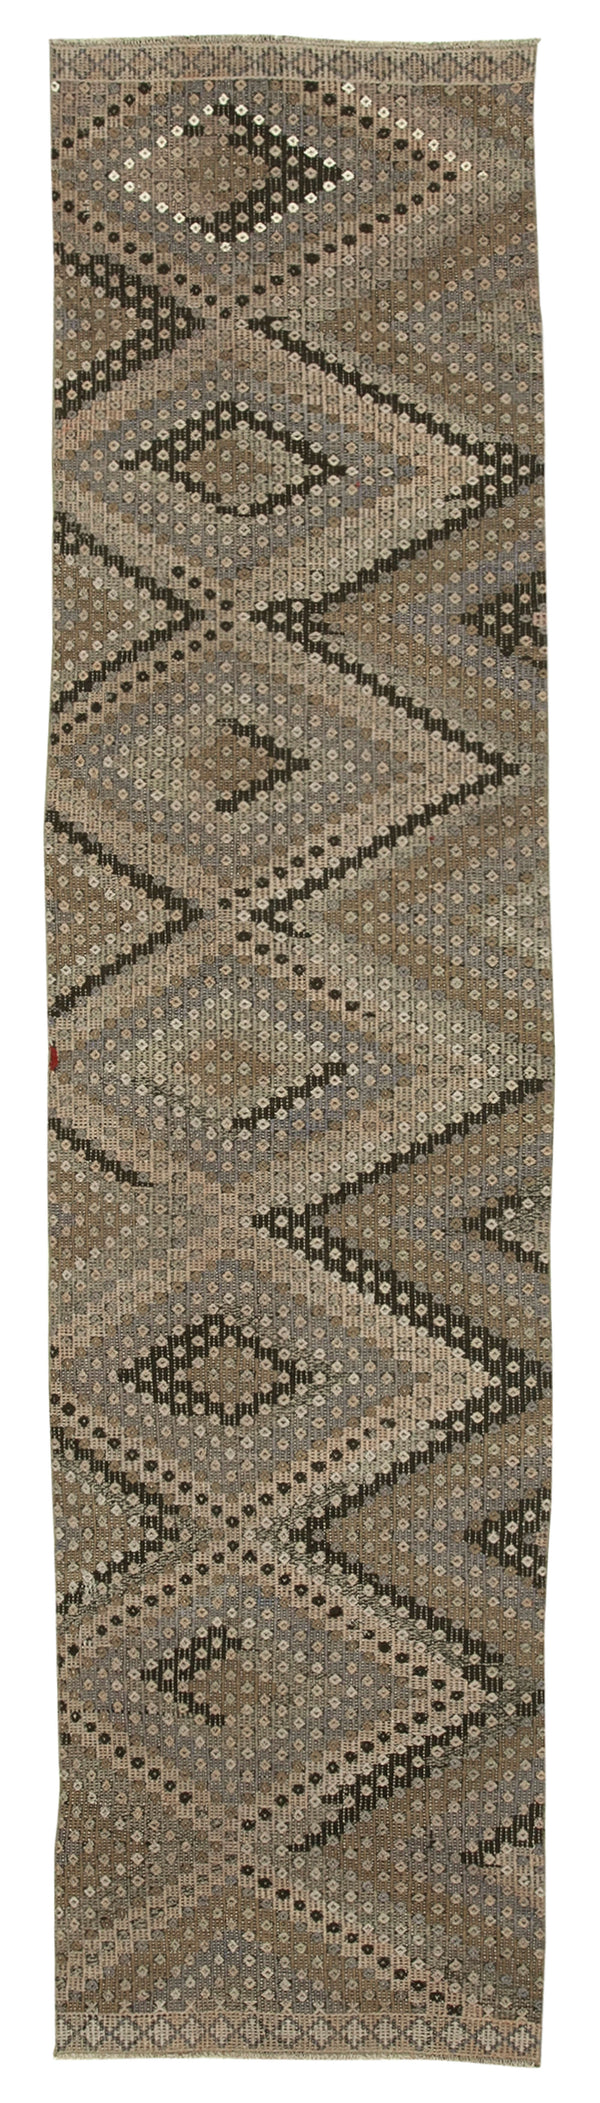 Handmade Kilim Runner > Design# OL-AC-29228 > Size: 2'-9" x 11'-8", Carpet Culture Rugs, Handmade Rugs, NYC Rugs, New Rugs, Shop Rugs, Rug Store, Outlet Rugs, SoHo Rugs, Rugs in USA